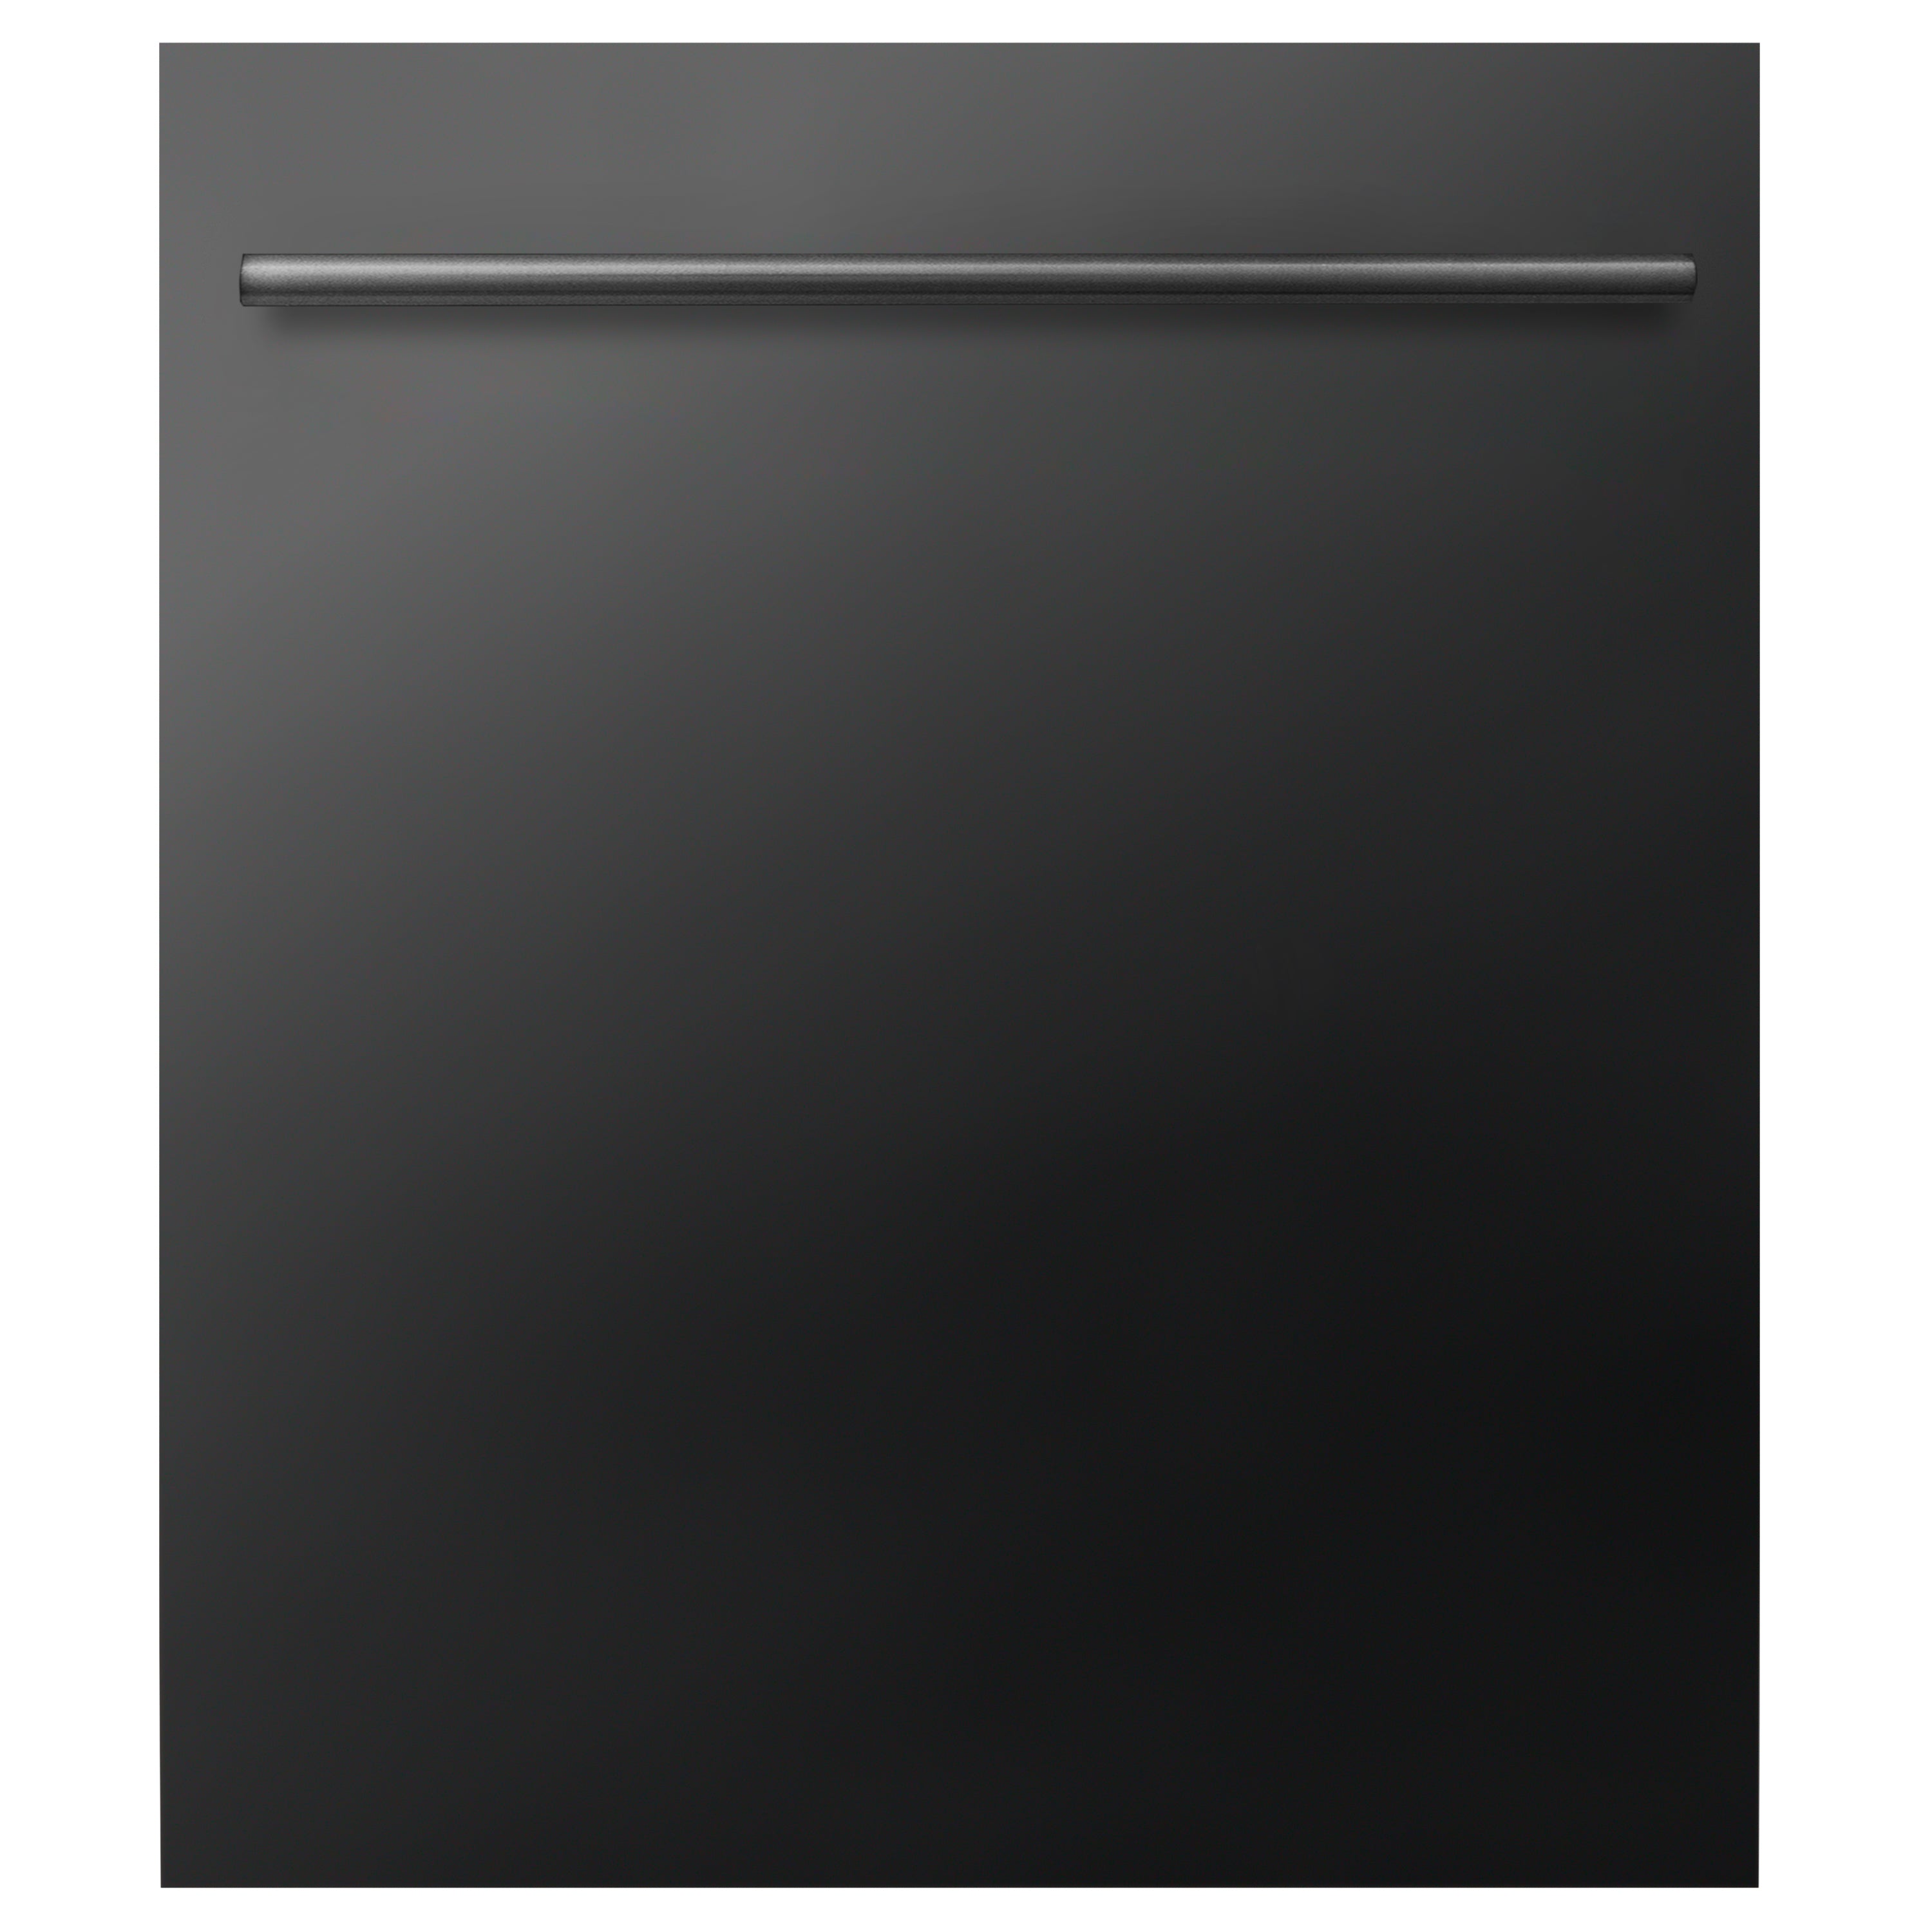 ZLINE 24 in. Black Stainless Top Control Dishwasher with Stainless Steel Tub and Modern Style Handle, 52dBa (DW-BS-H-24)